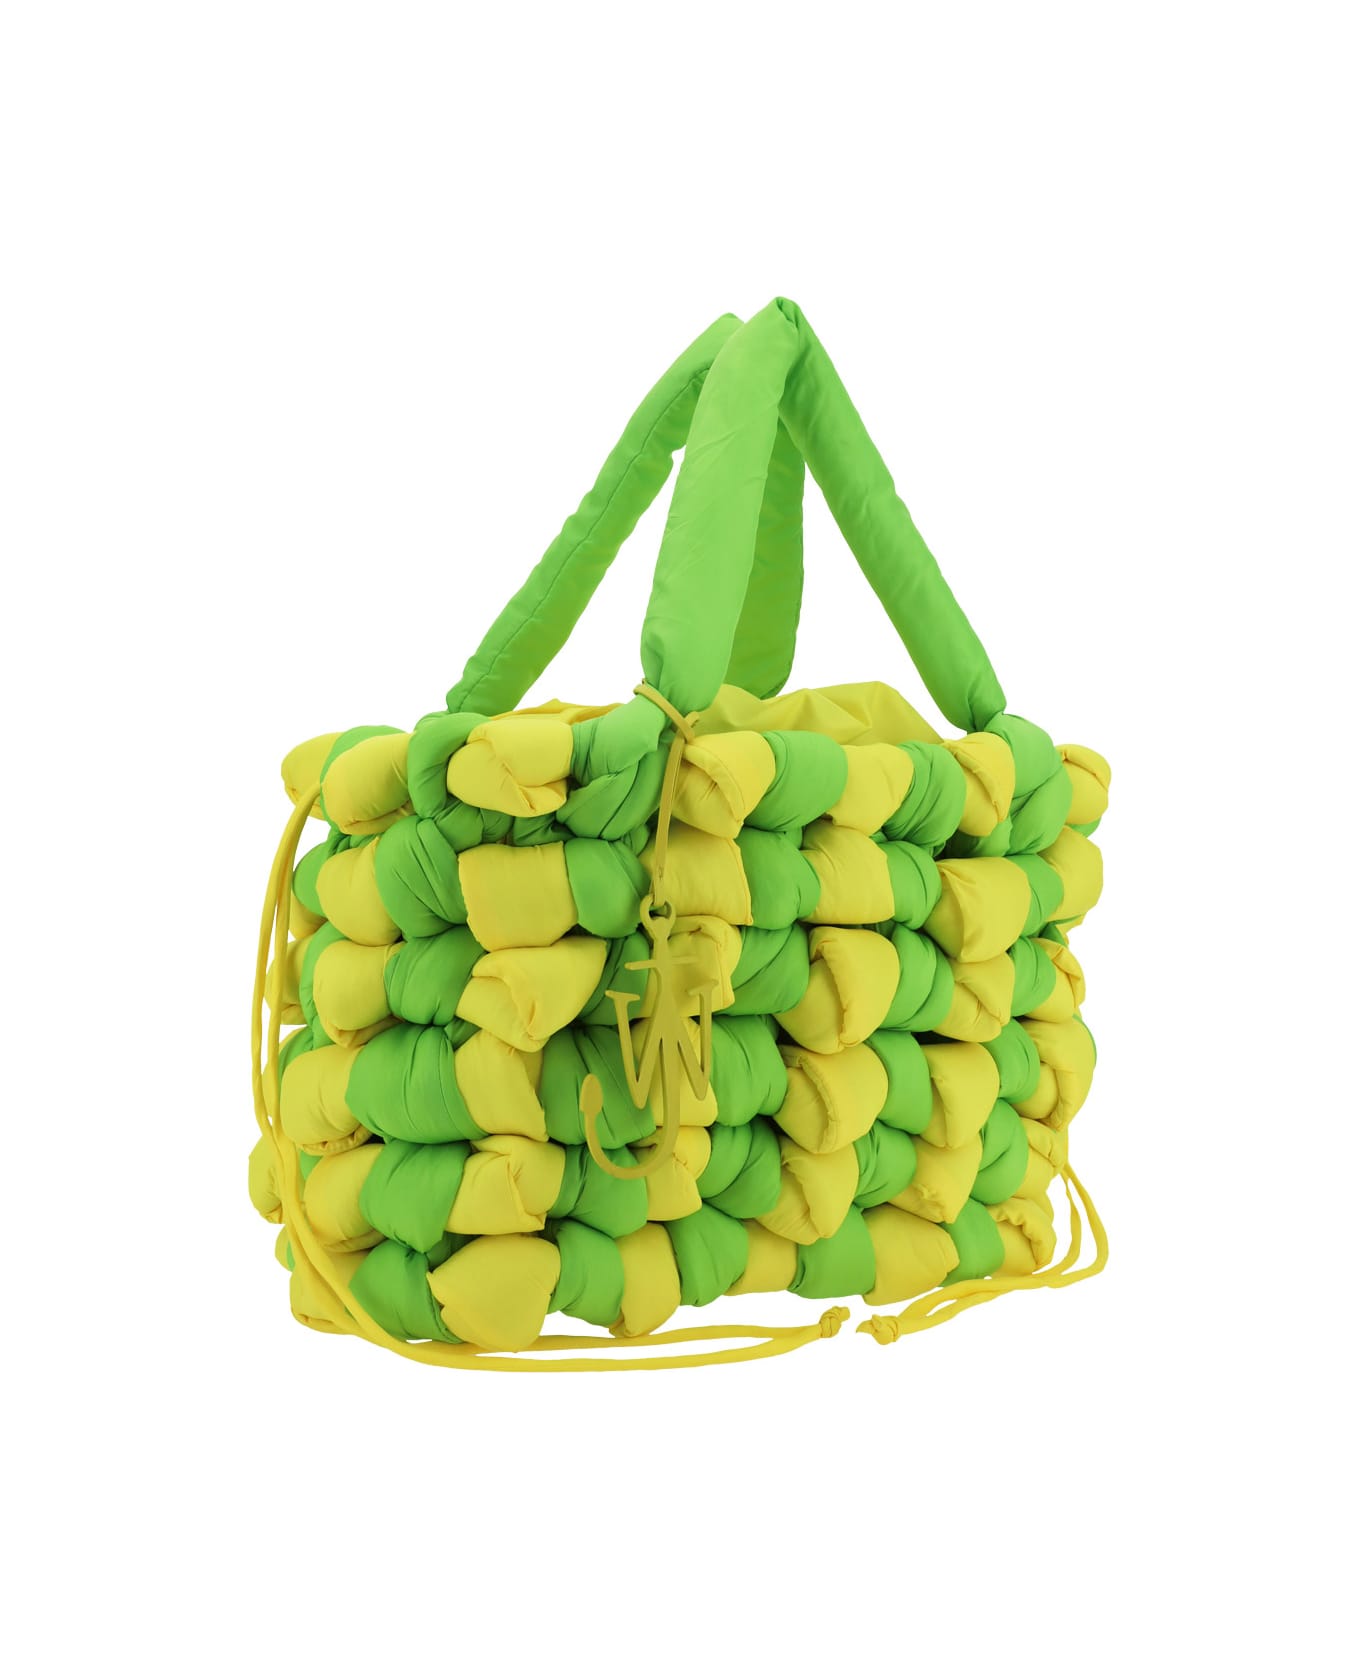 J.W. Anderson Knotted Tote Bag - Lime Green/yellow